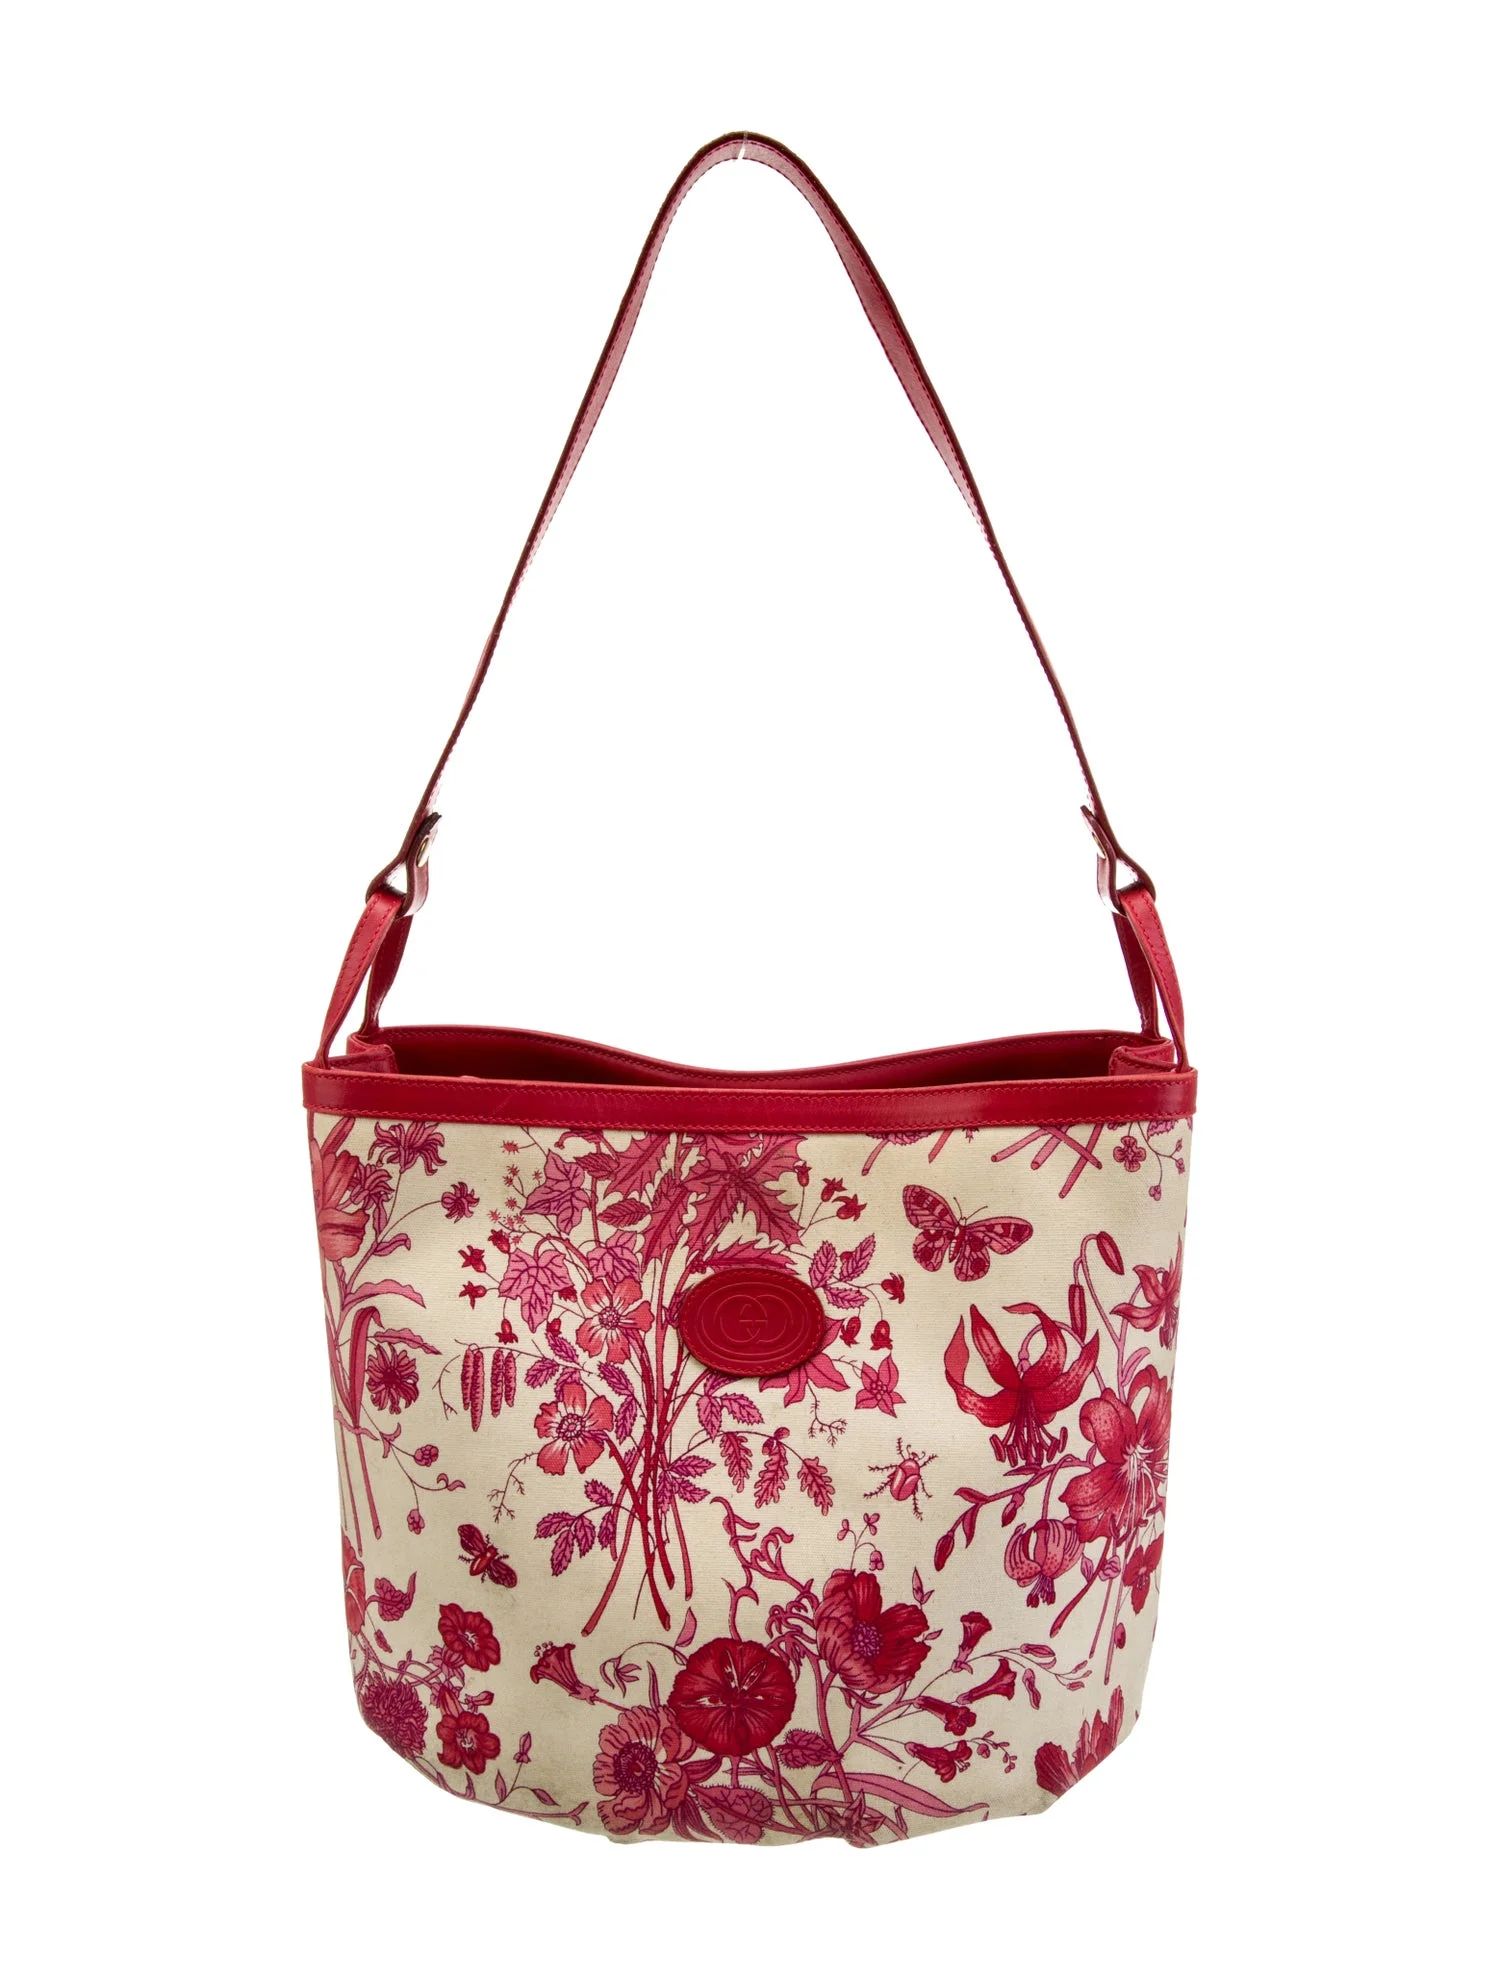 Floral Bucket Bag | The RealReal